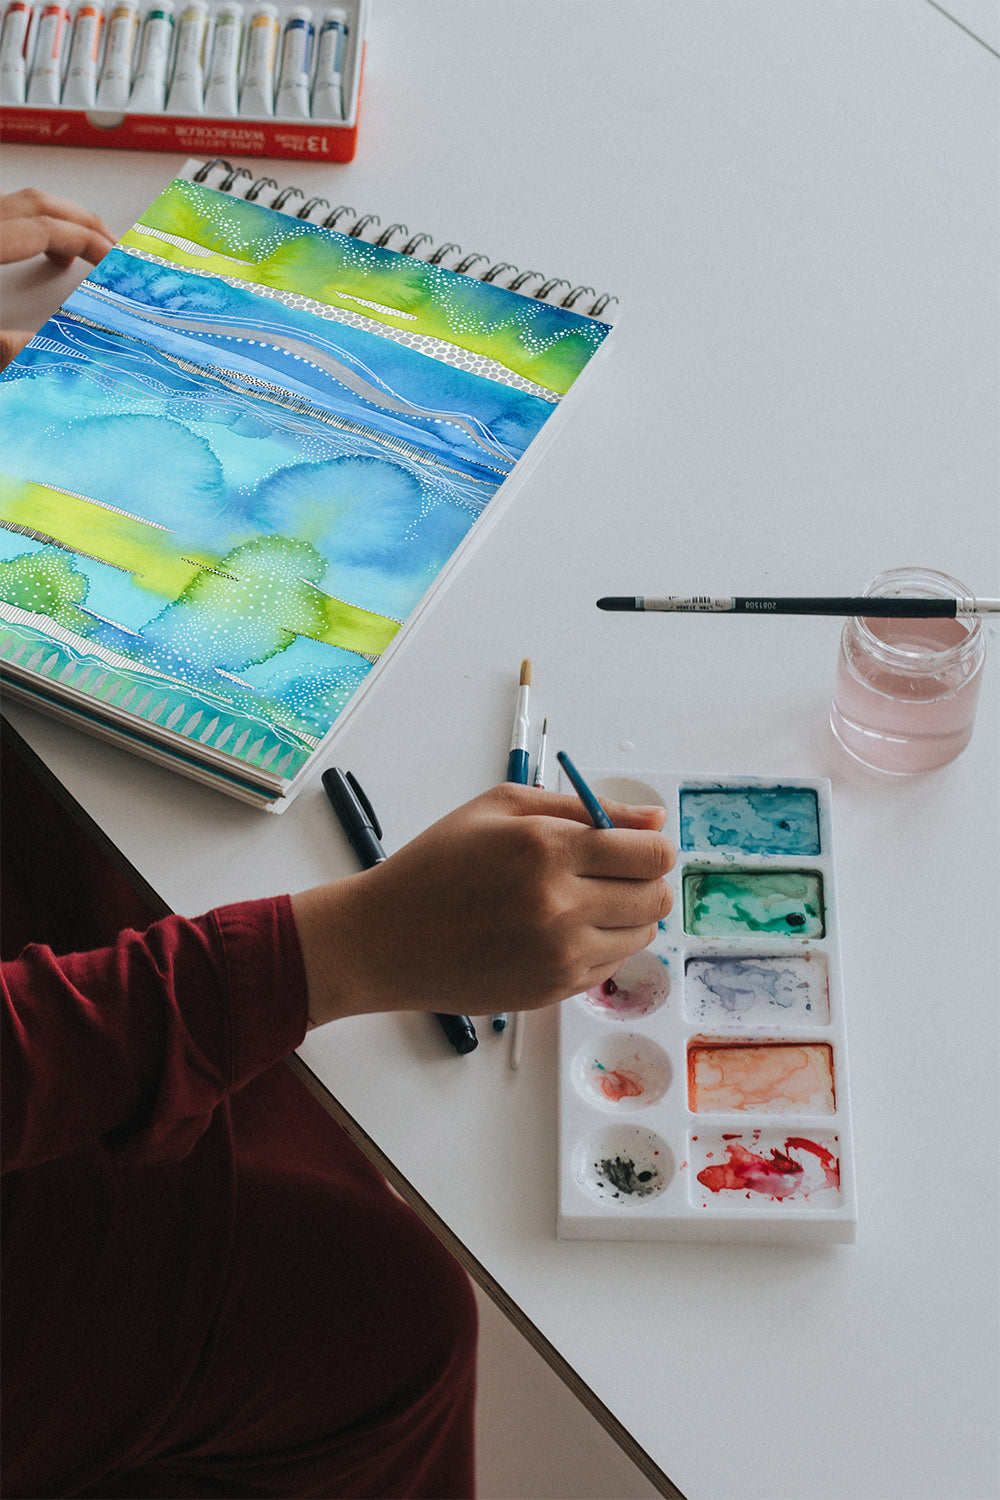 this is an image of a person sitting at a table painting an abstract landscape painting using blue, teal and lime green.  the person is dipping their paint brush into a pan of watercolor paints.  there is also a jar a water with a paint brush laying over it in front of the person.